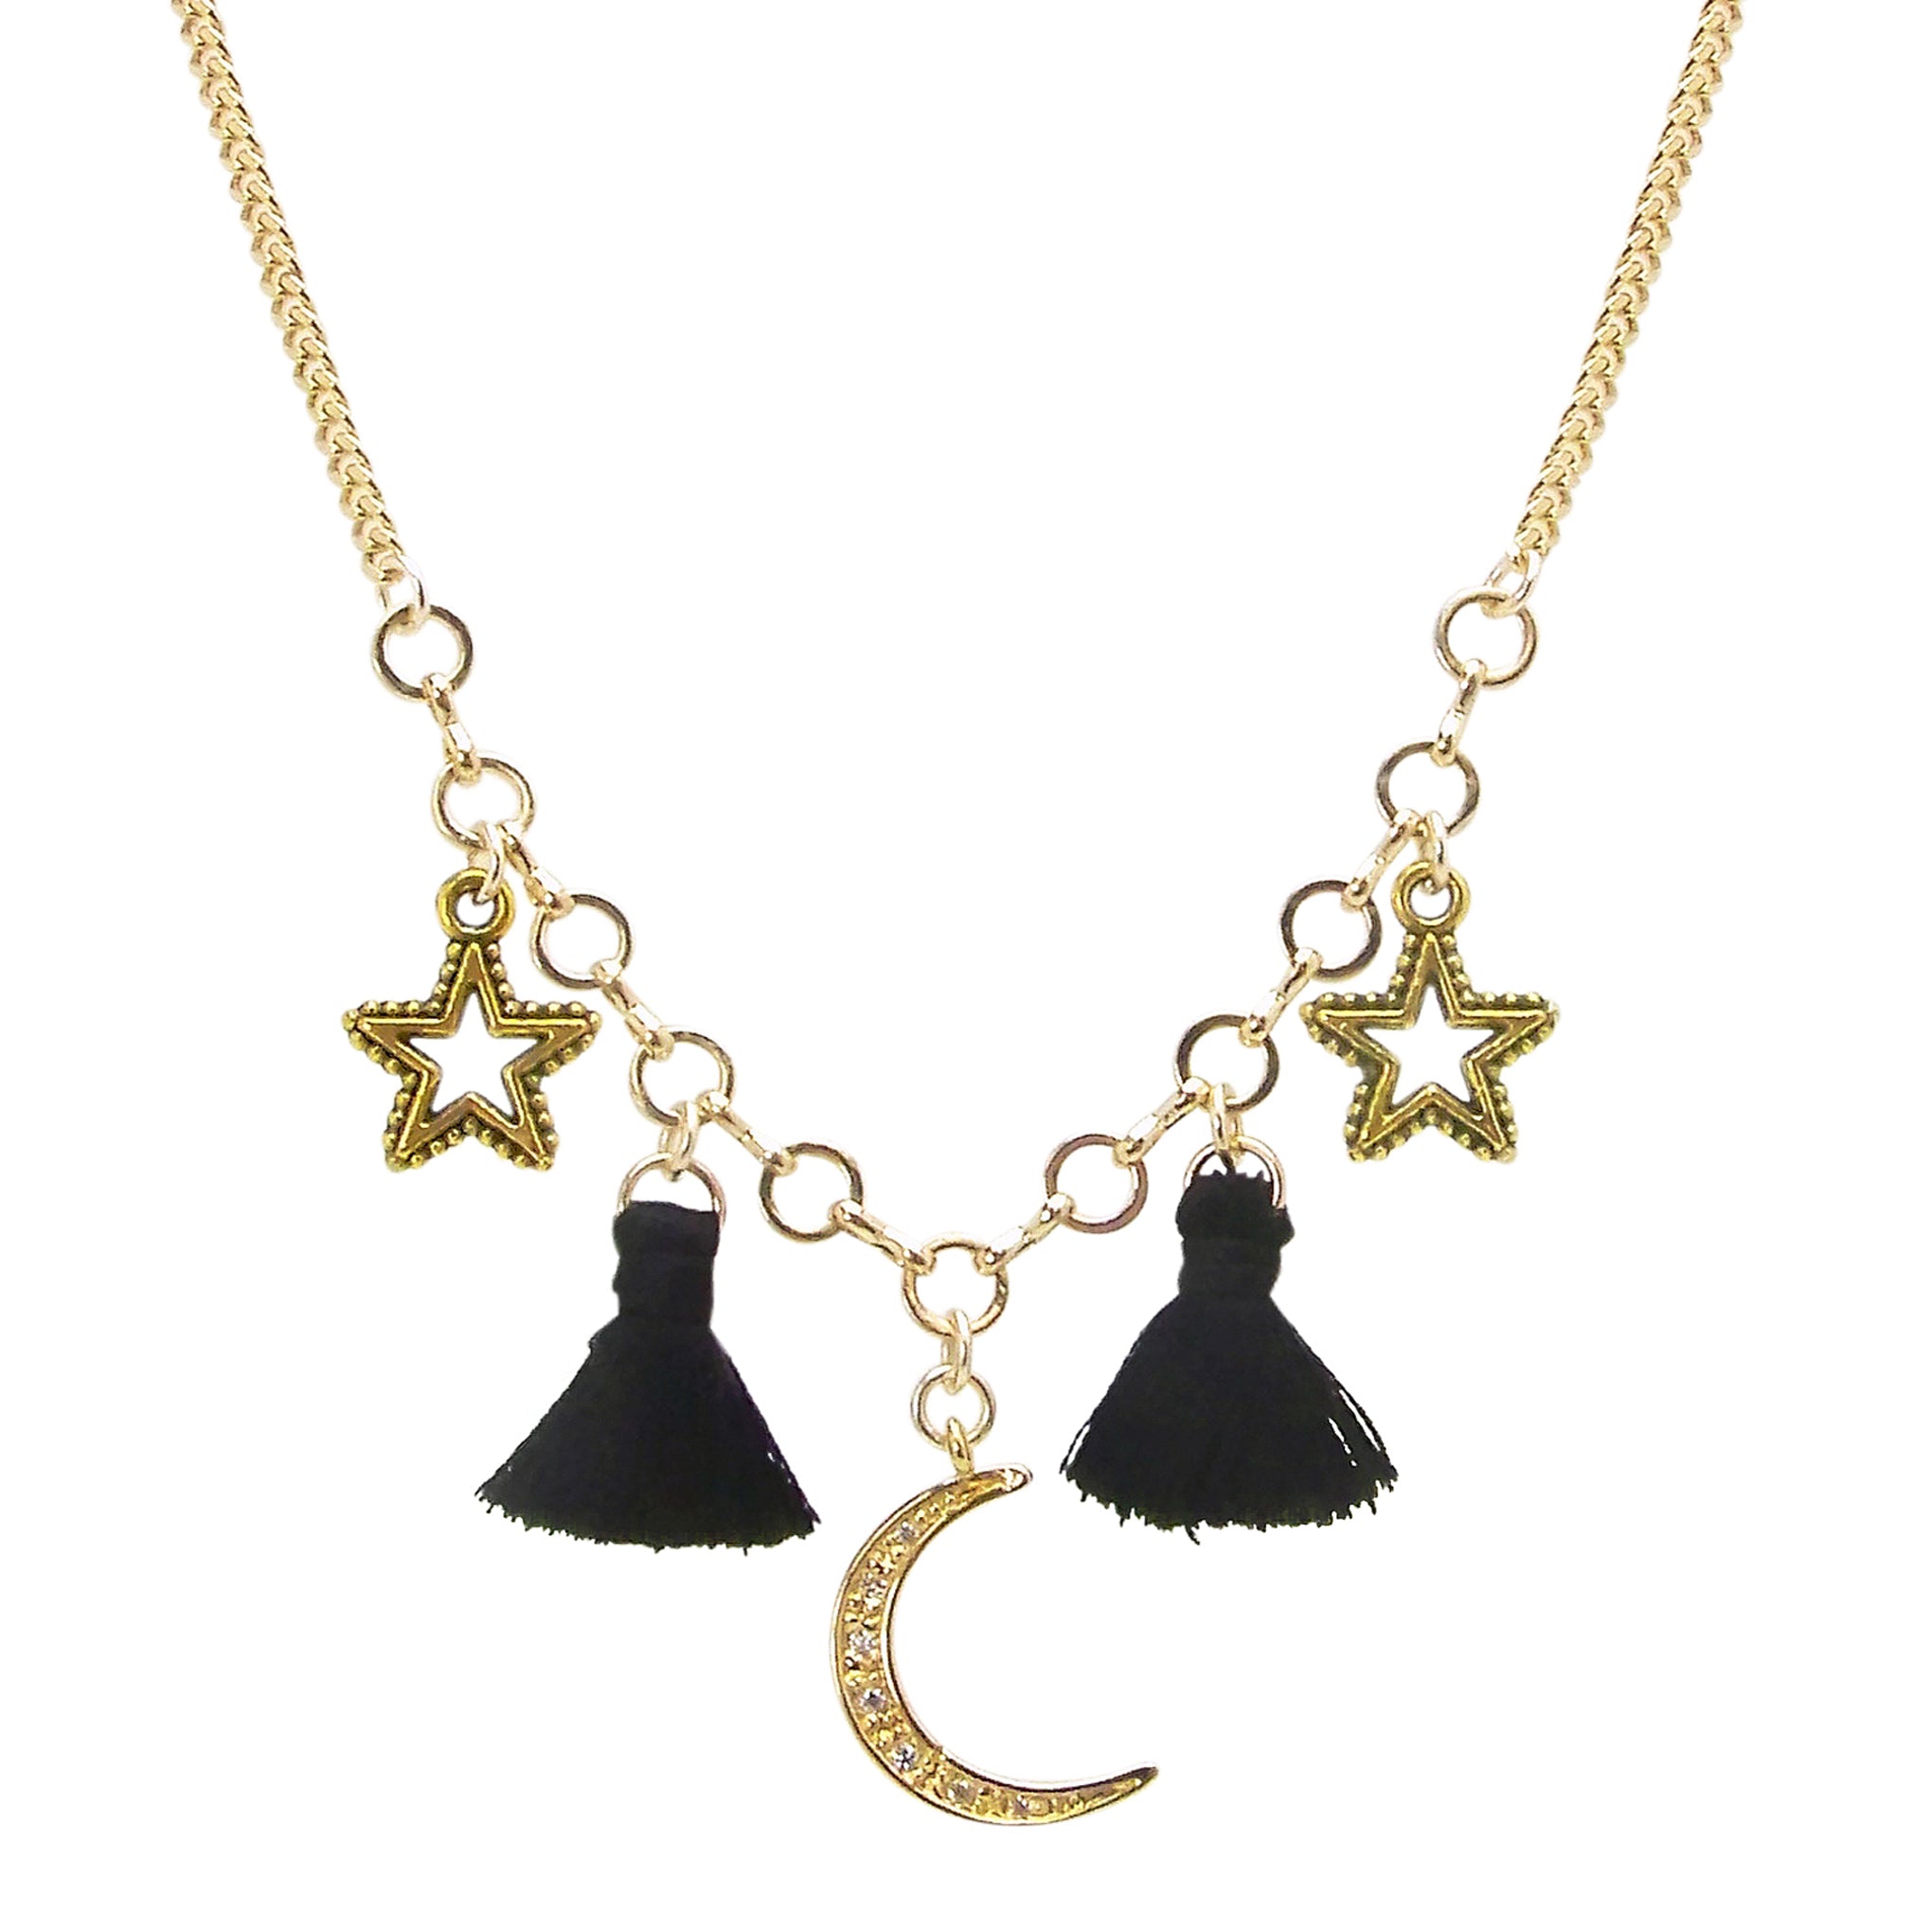 Yunis K Moon Stars and Tassel Necklace in Black and Gold Plated